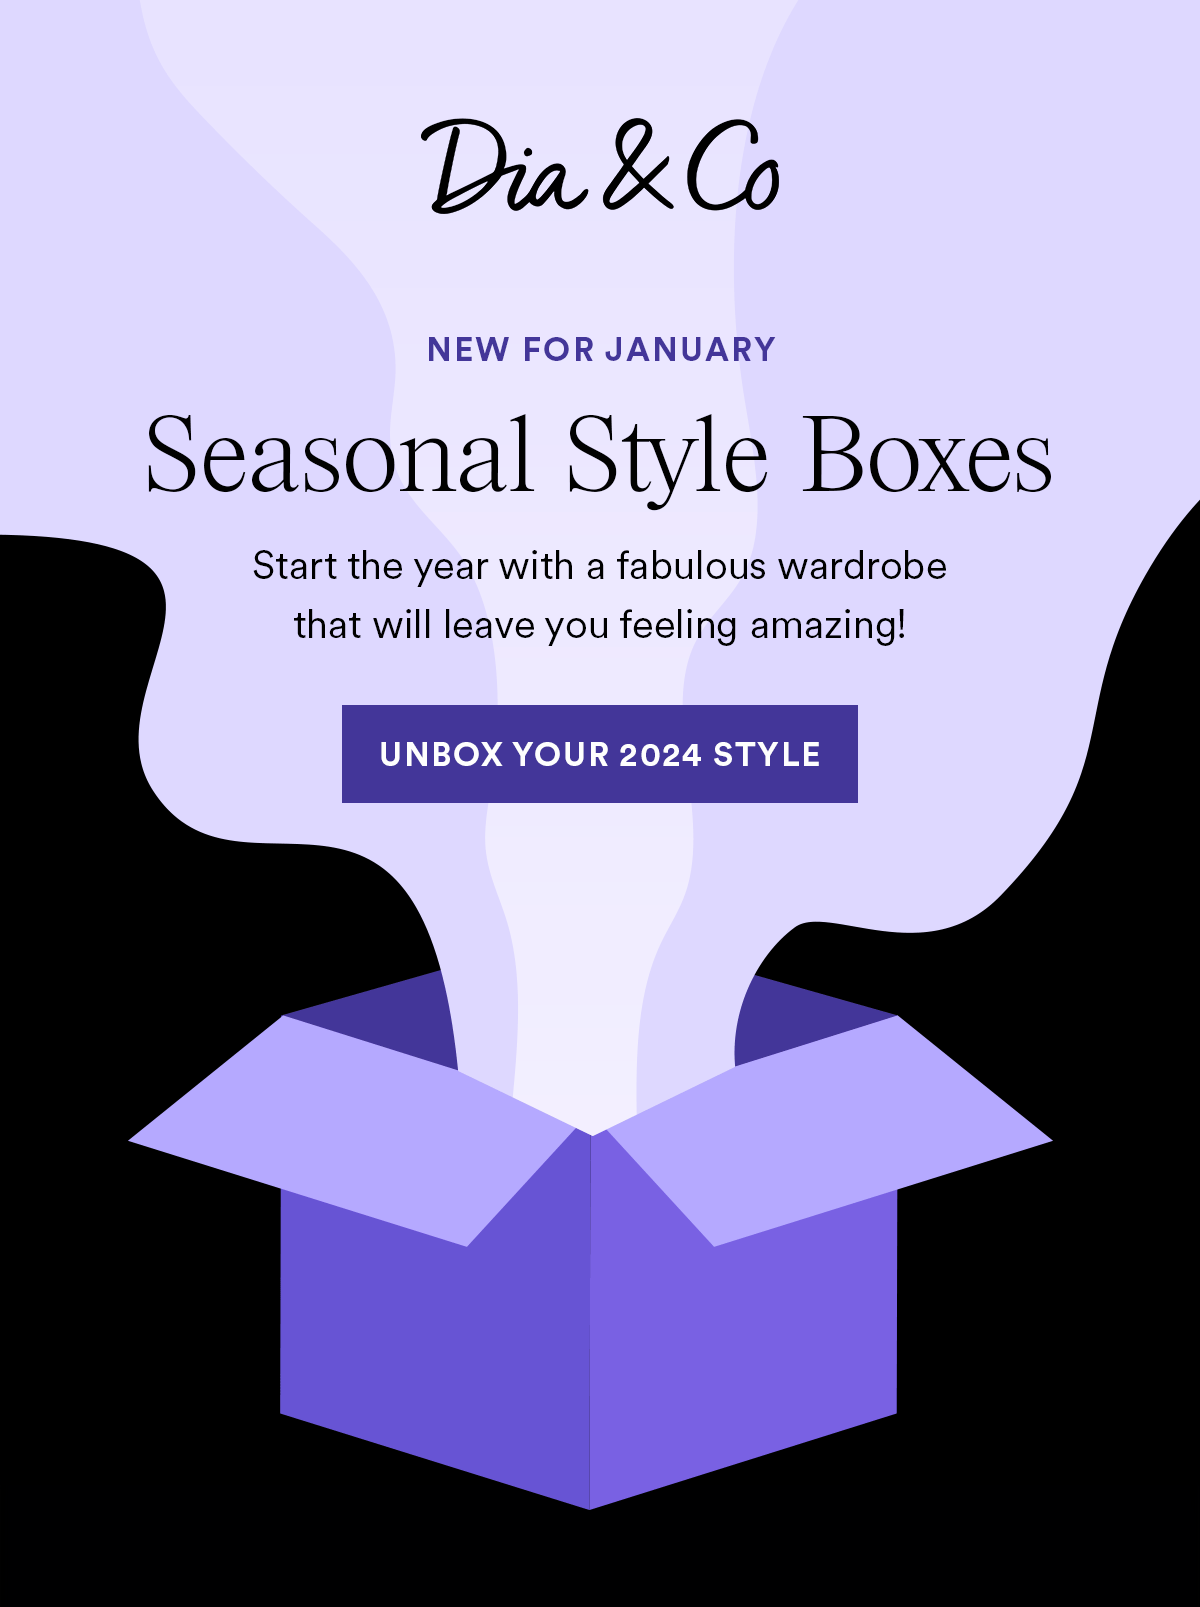 New January Seasonal Style Boxes are here